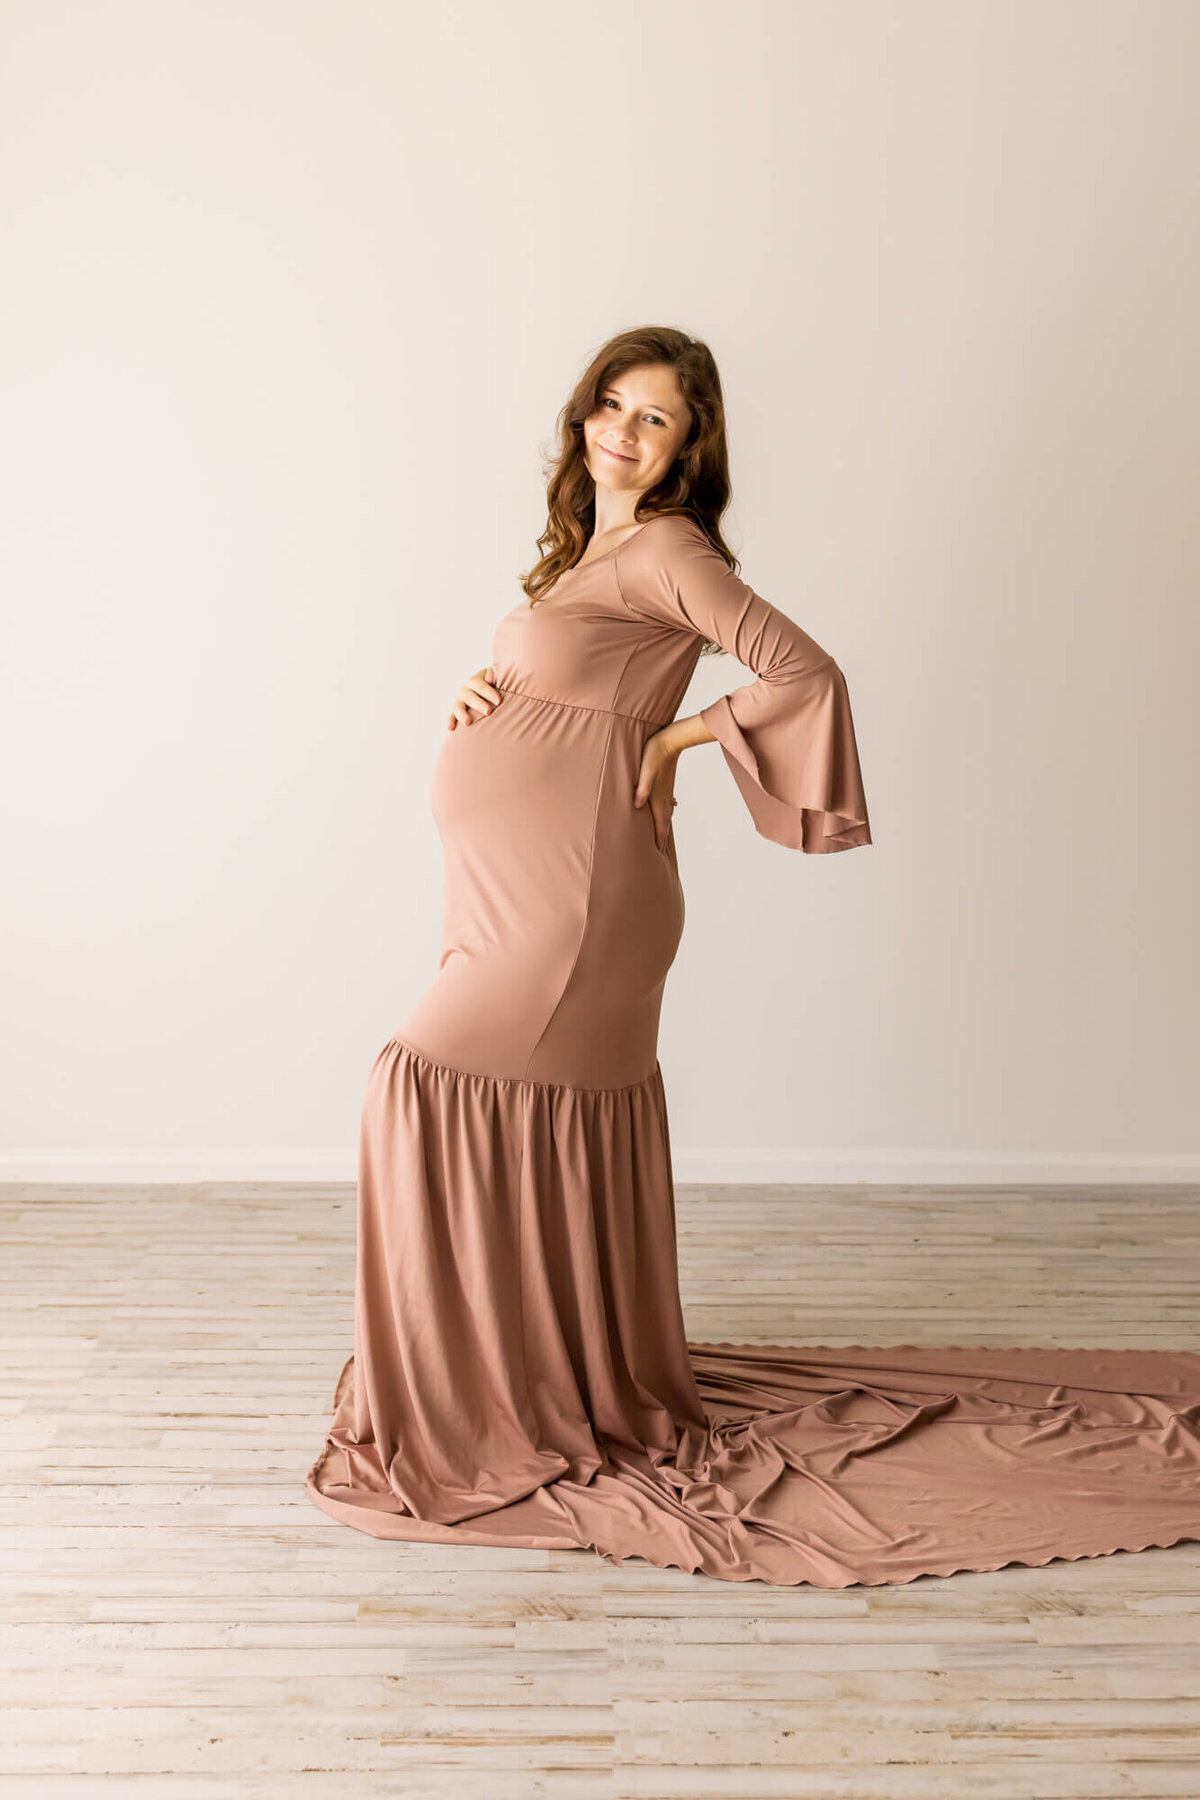 Mom to be in a taupe maternity dress